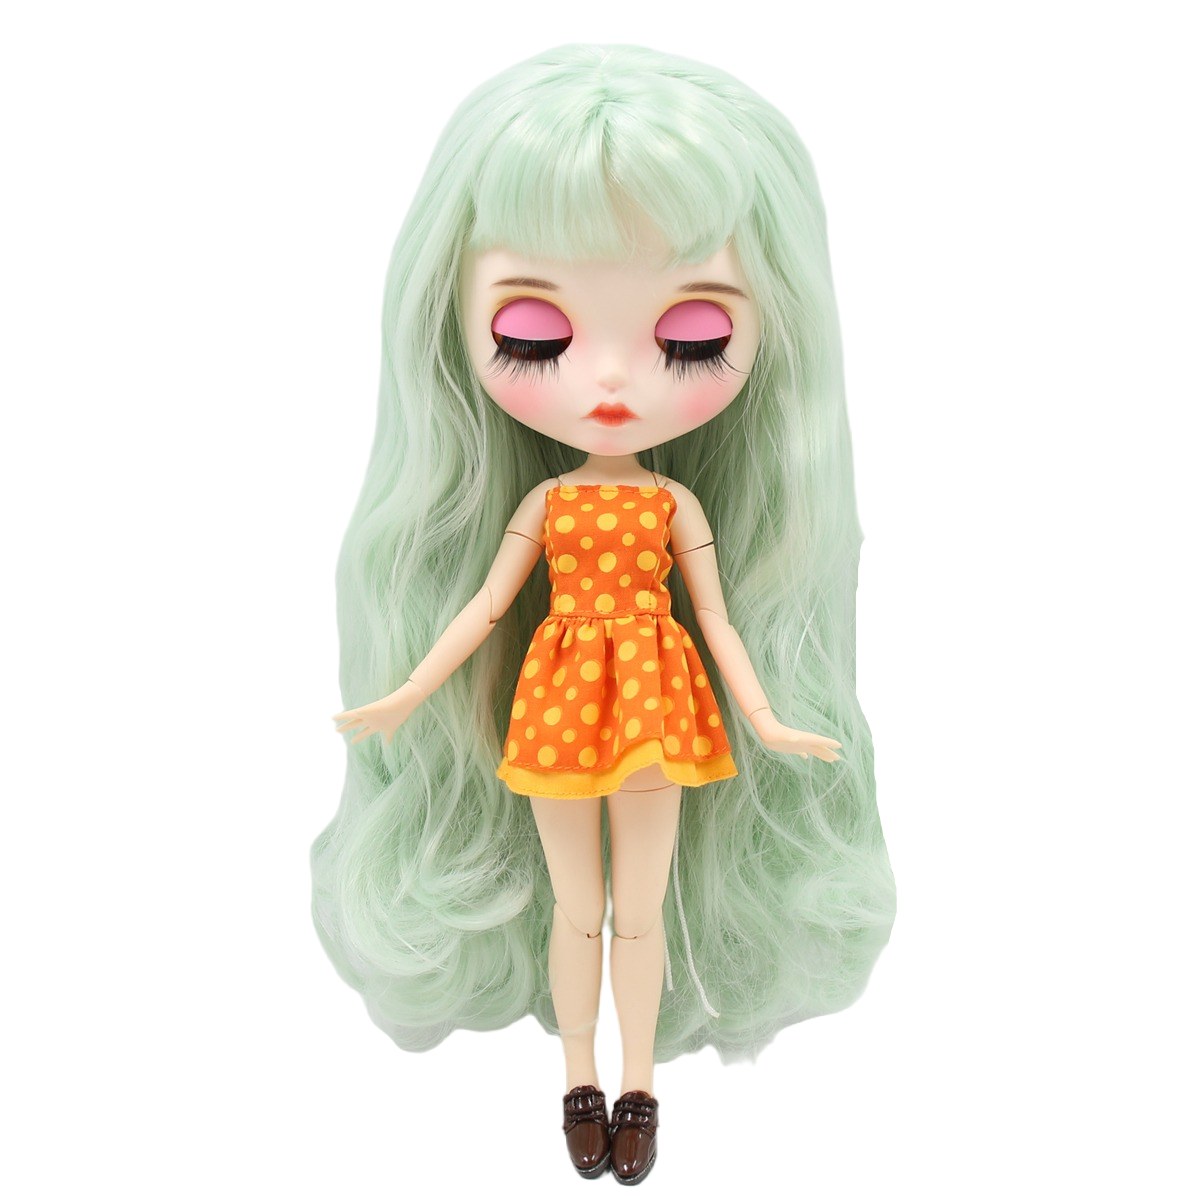 Sophie – Premium Custom Neo Blythe Doll with Green Hair, White Skin & Matte Pouty Face Best-selling custom Blythe dolls Green hair custom Blythe doll Matte face custom Blythe doll White skin custom Blythe doll